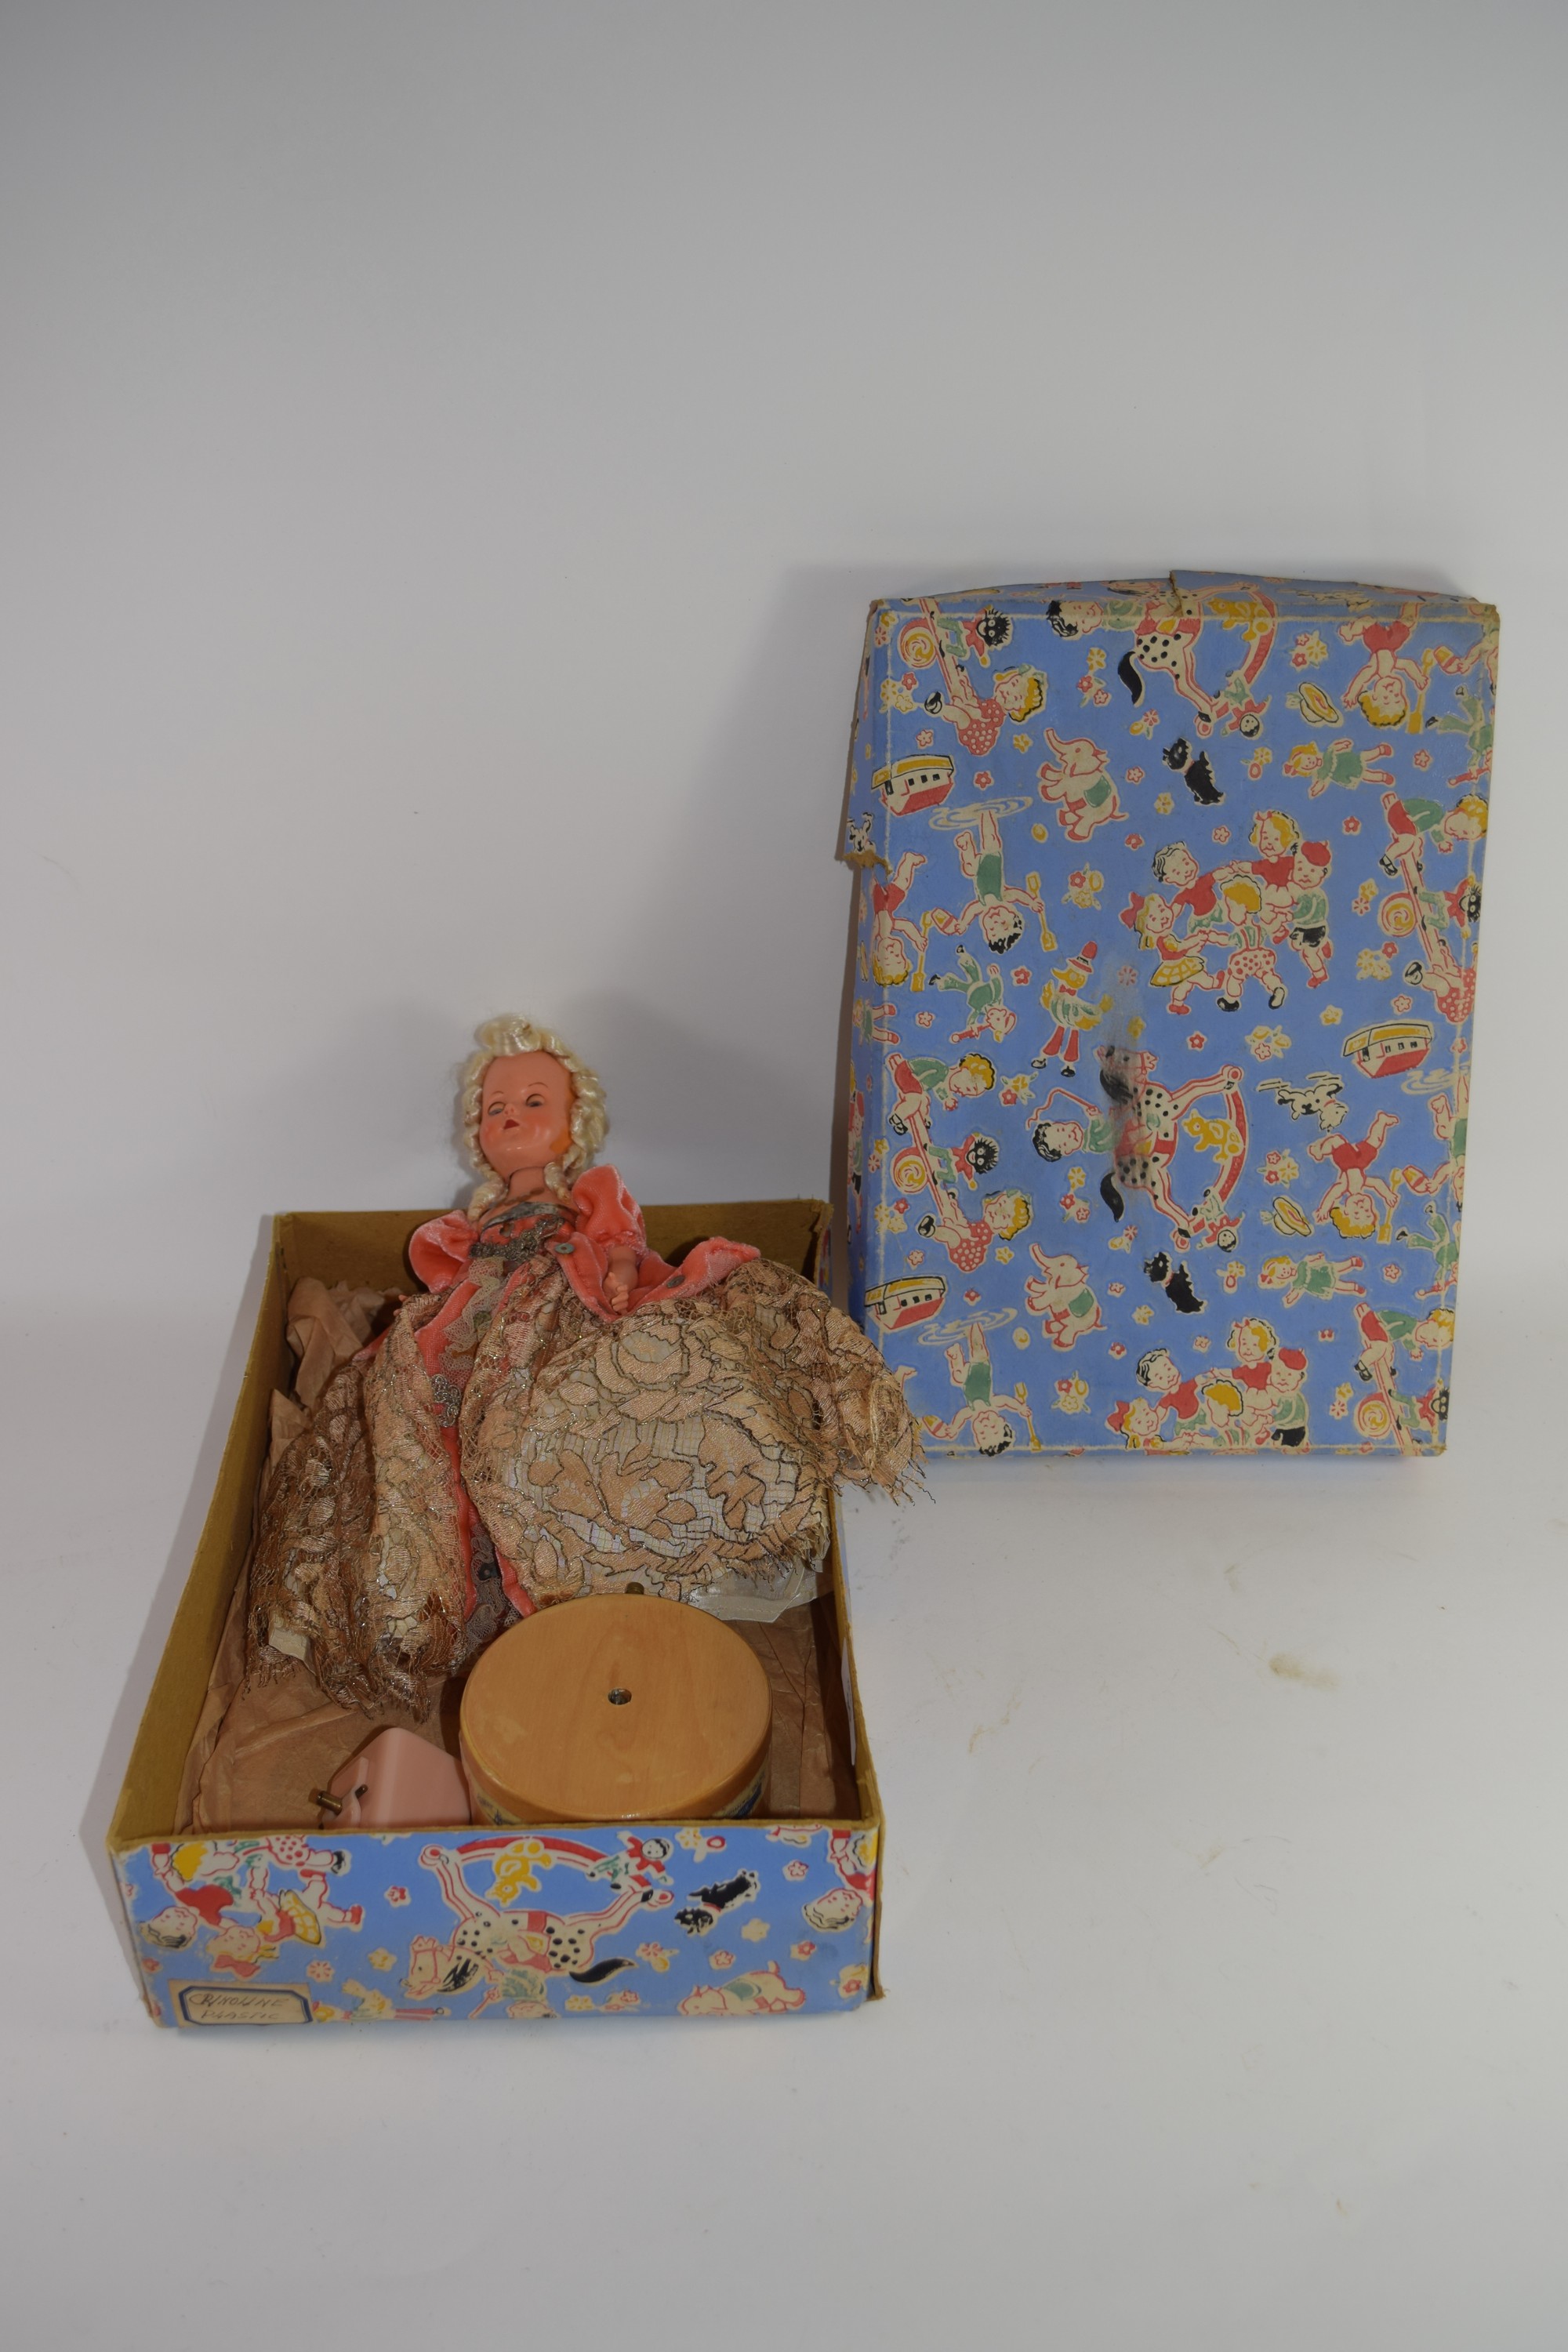 1950s/60s Doll, dressed in ornate ballgown, with music rotating stand, height incl stand approx - Image 2 of 2